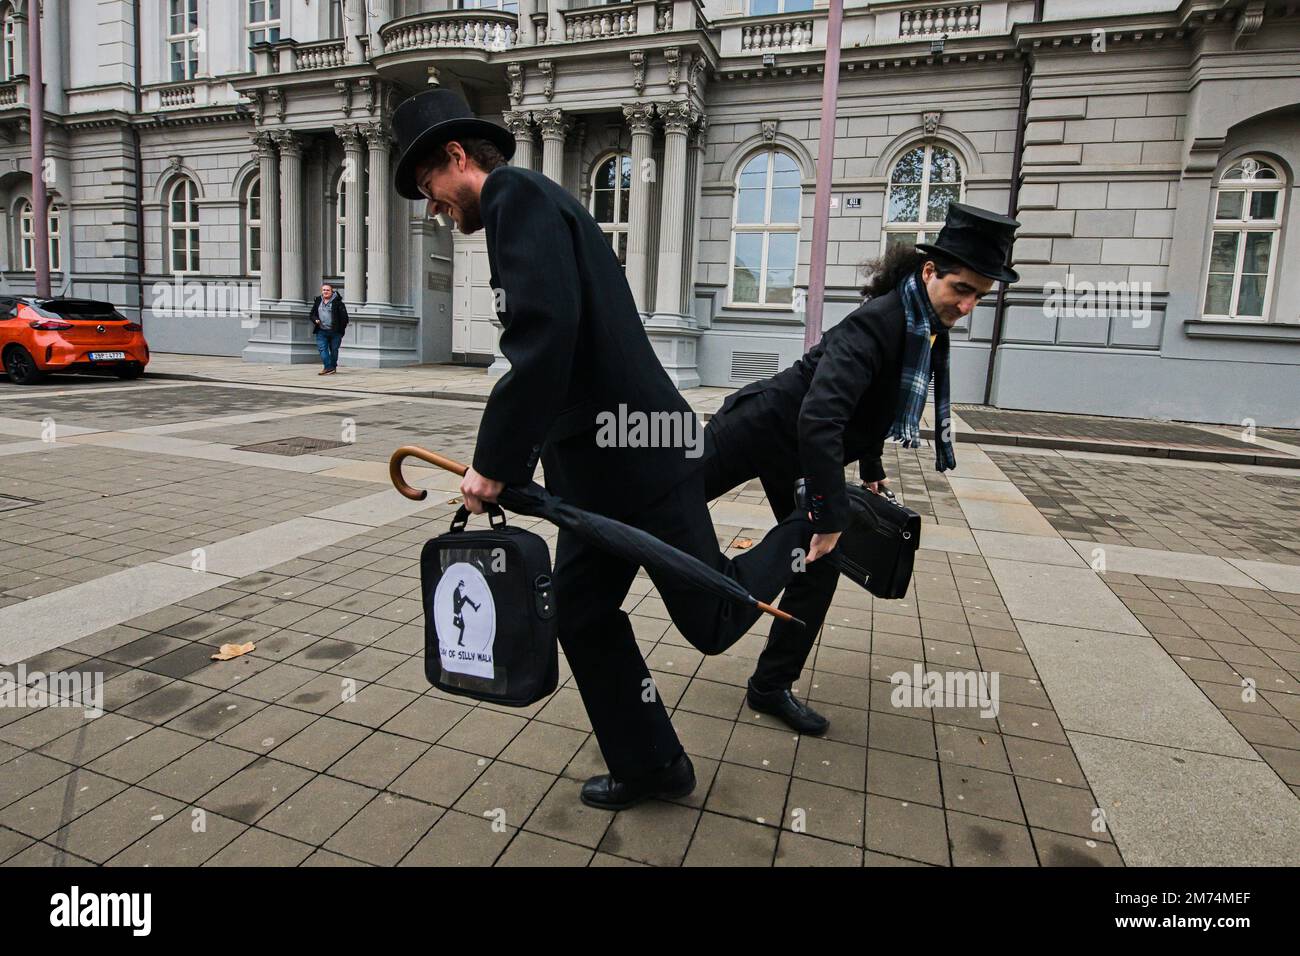 Tenth mock event called 'Silly Walks through Brno' on the occasion of International Silly Walk Day inspired by British comedy troupe Monty Python. Participants meet outside Supreme Administrative Court at Justice statue in Brno, Czech Republic, January 7, 2023. (CTK Photo/Patrik Uhlir) Stock Photo